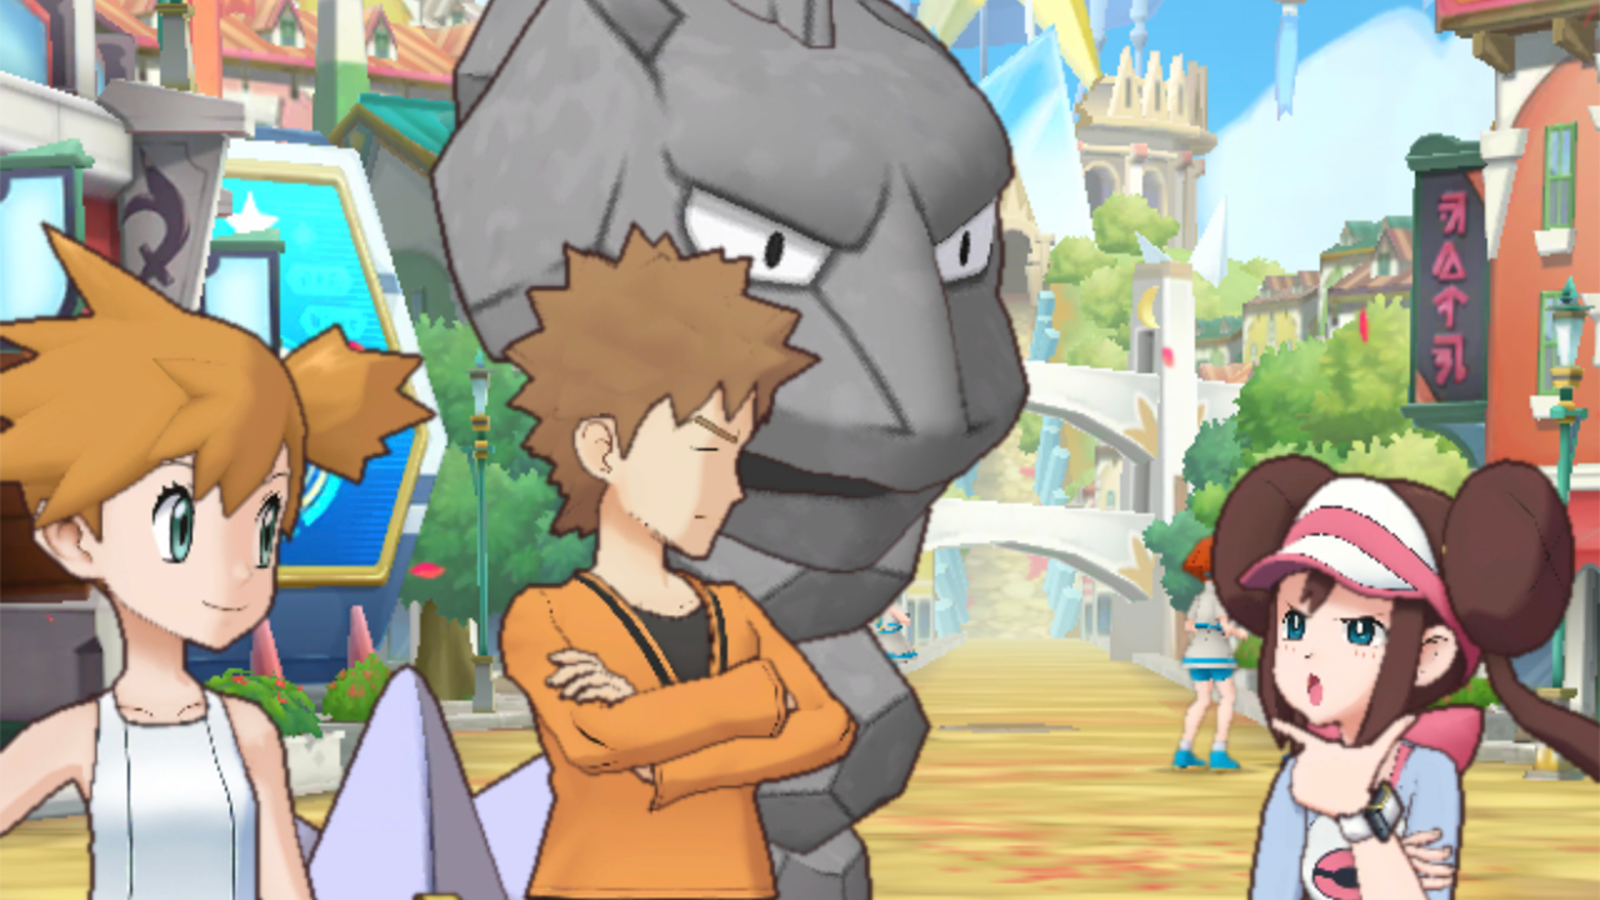 How do you evolve Onix in Black 2?